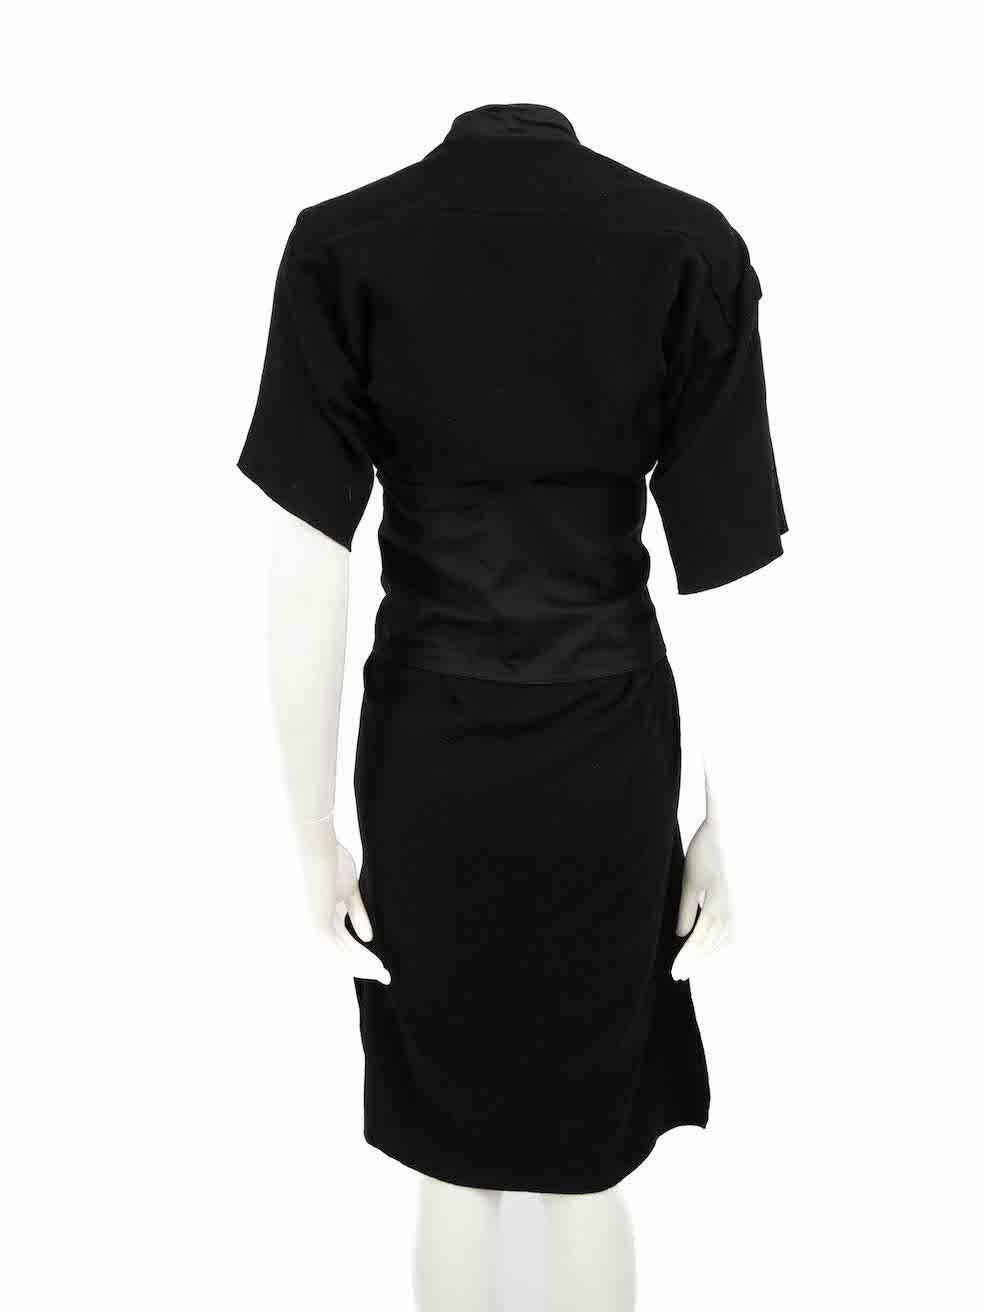 Vivienne Westwood Vivienne West Wood Anglomania Black Corset T-shirt Dress XS  In Good Condition For Sale In London, GB